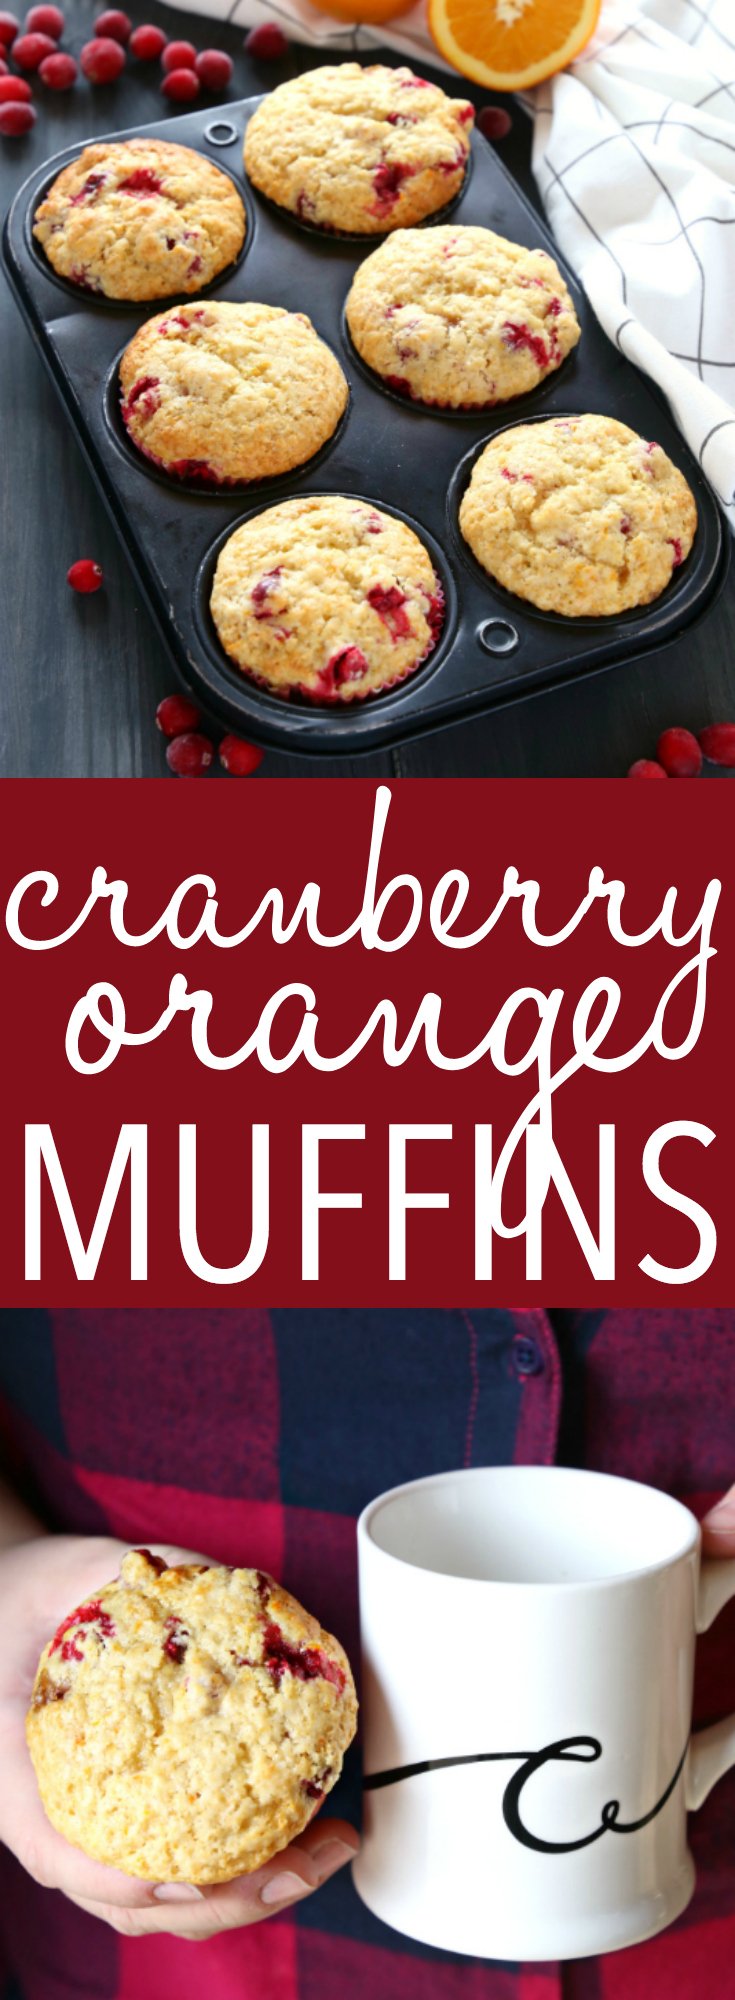 These Cranberry Orange Muffins are packed with tart cranberries and zesty orange flavour and they make the perfect sweet treat or snack! They're the perfect recipe for beginning bakers because they're easy to make with simple ingredients! Recipe from thebusybaker.ca! #cranberryorangemuffins #easymuffinrecipe via @busybakerblog